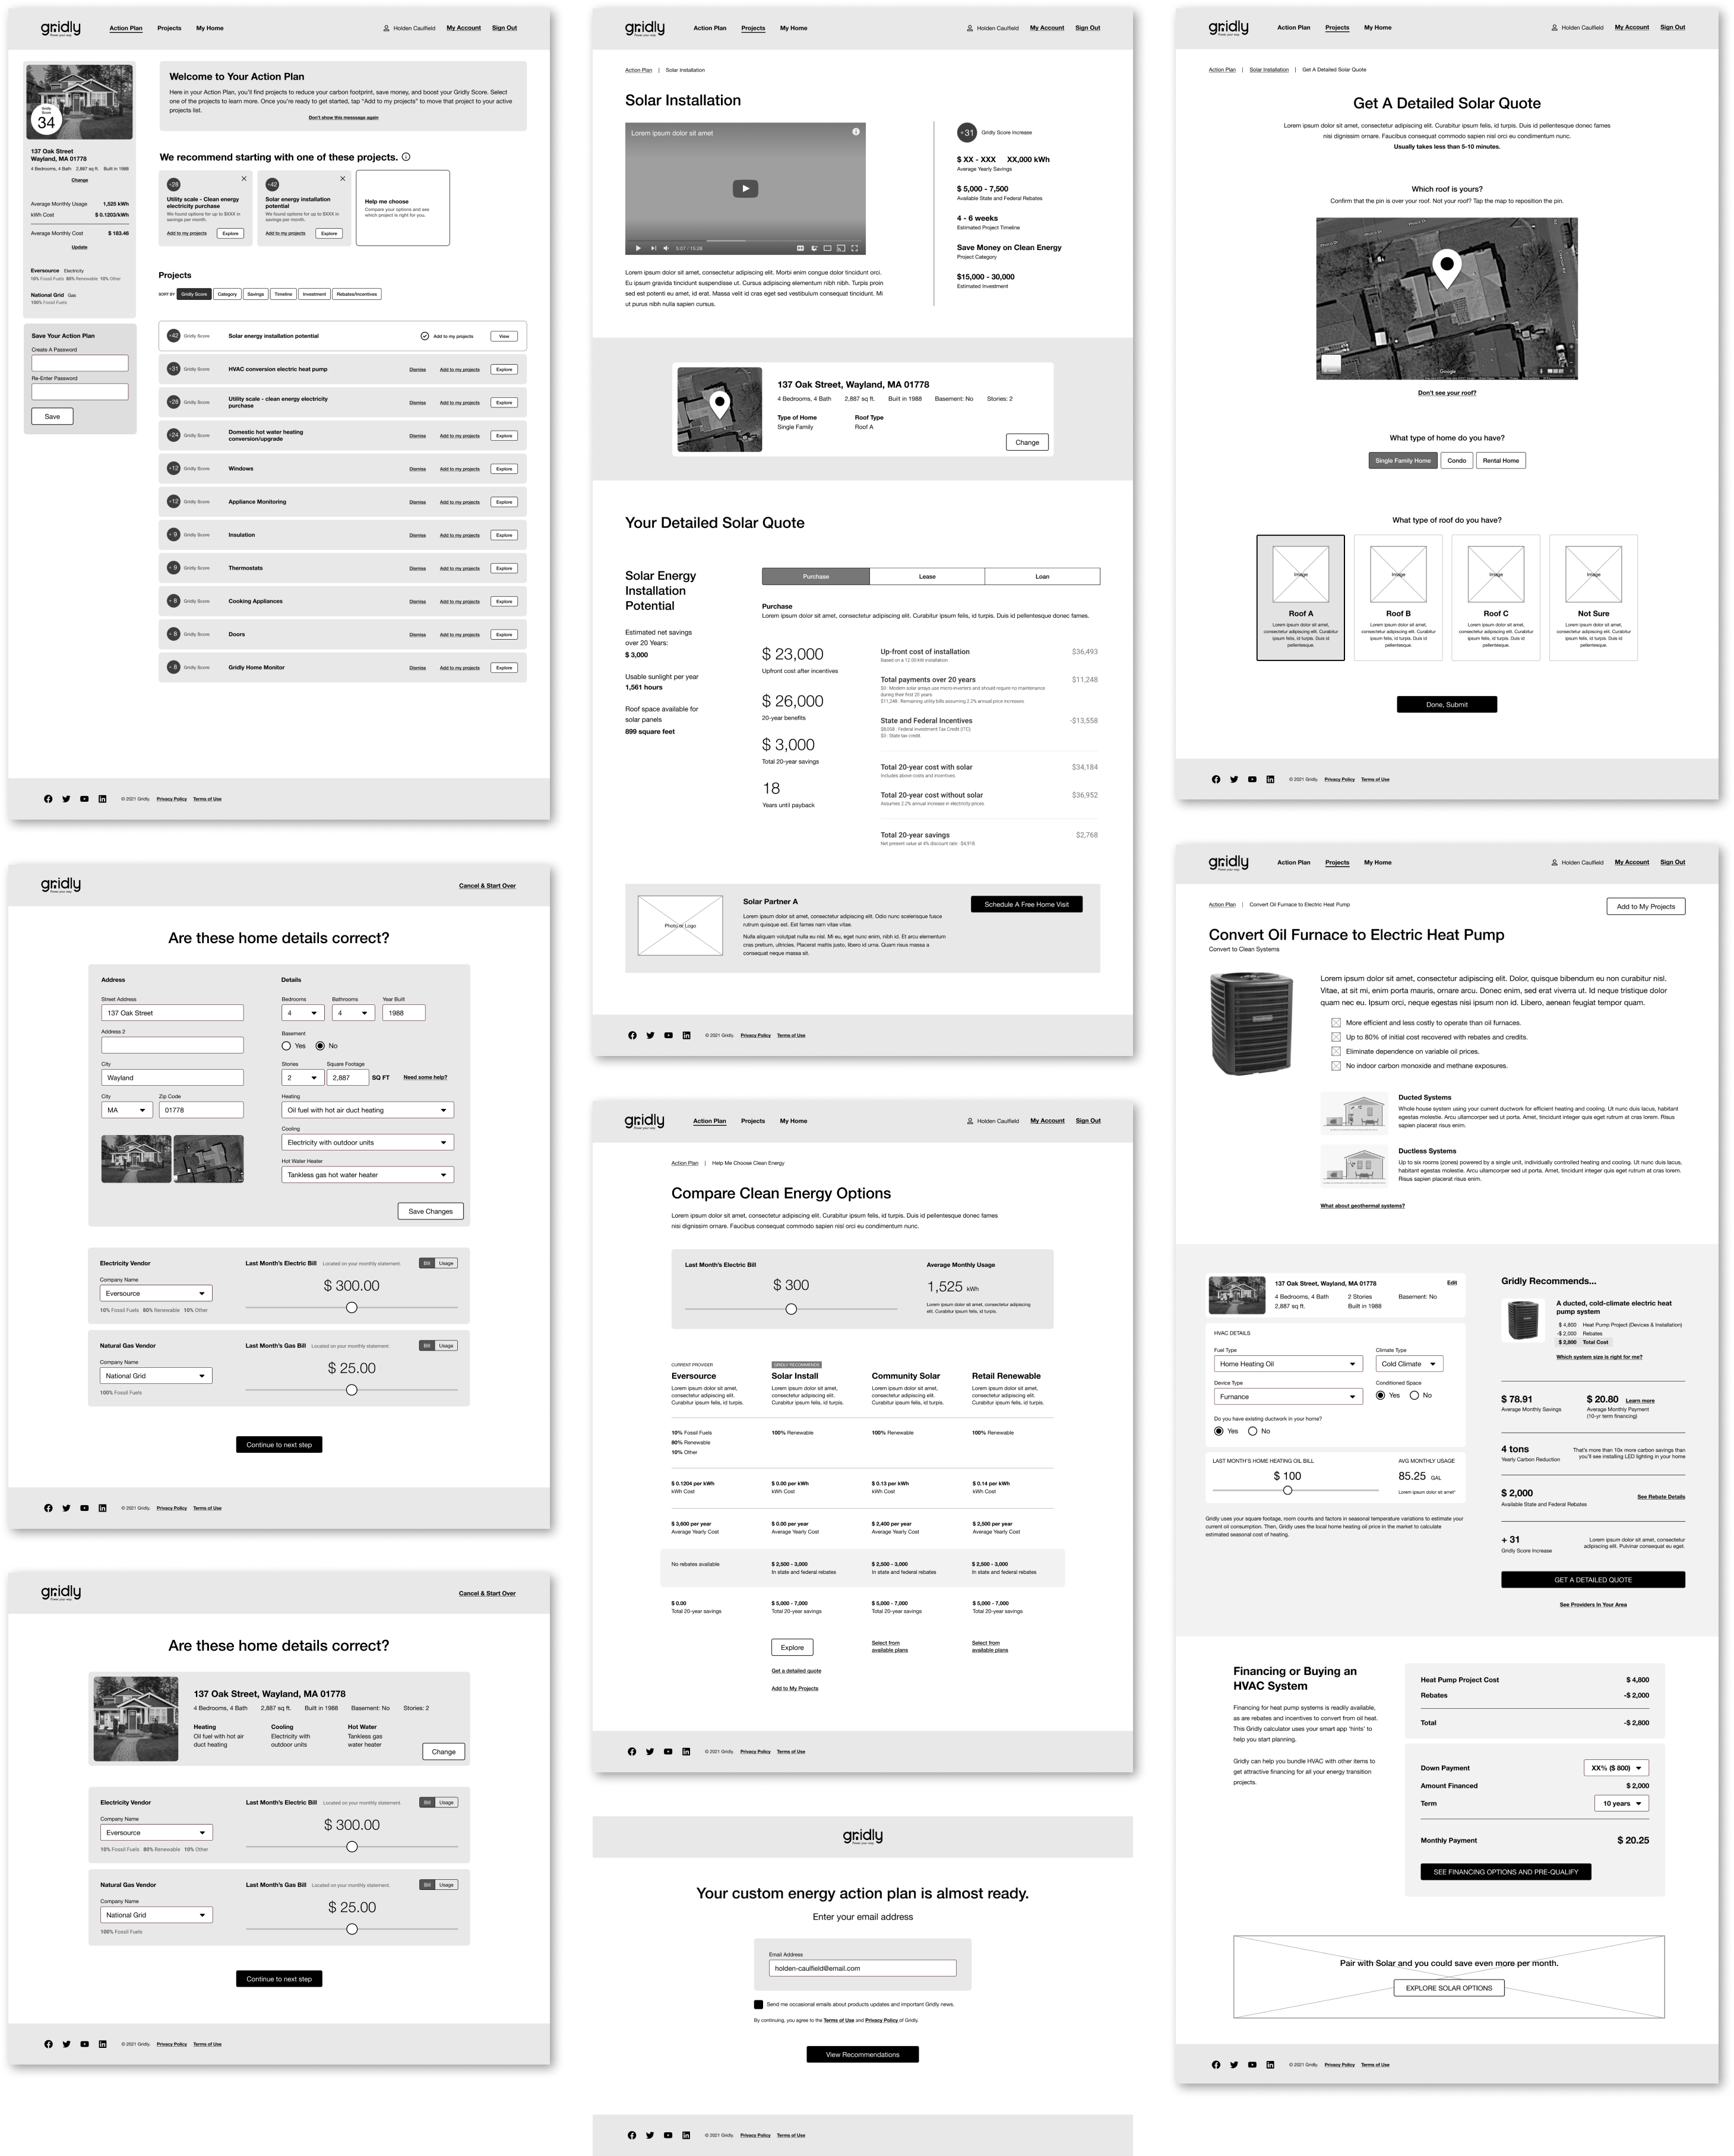 A collection of screens showing the wireframe prototype.